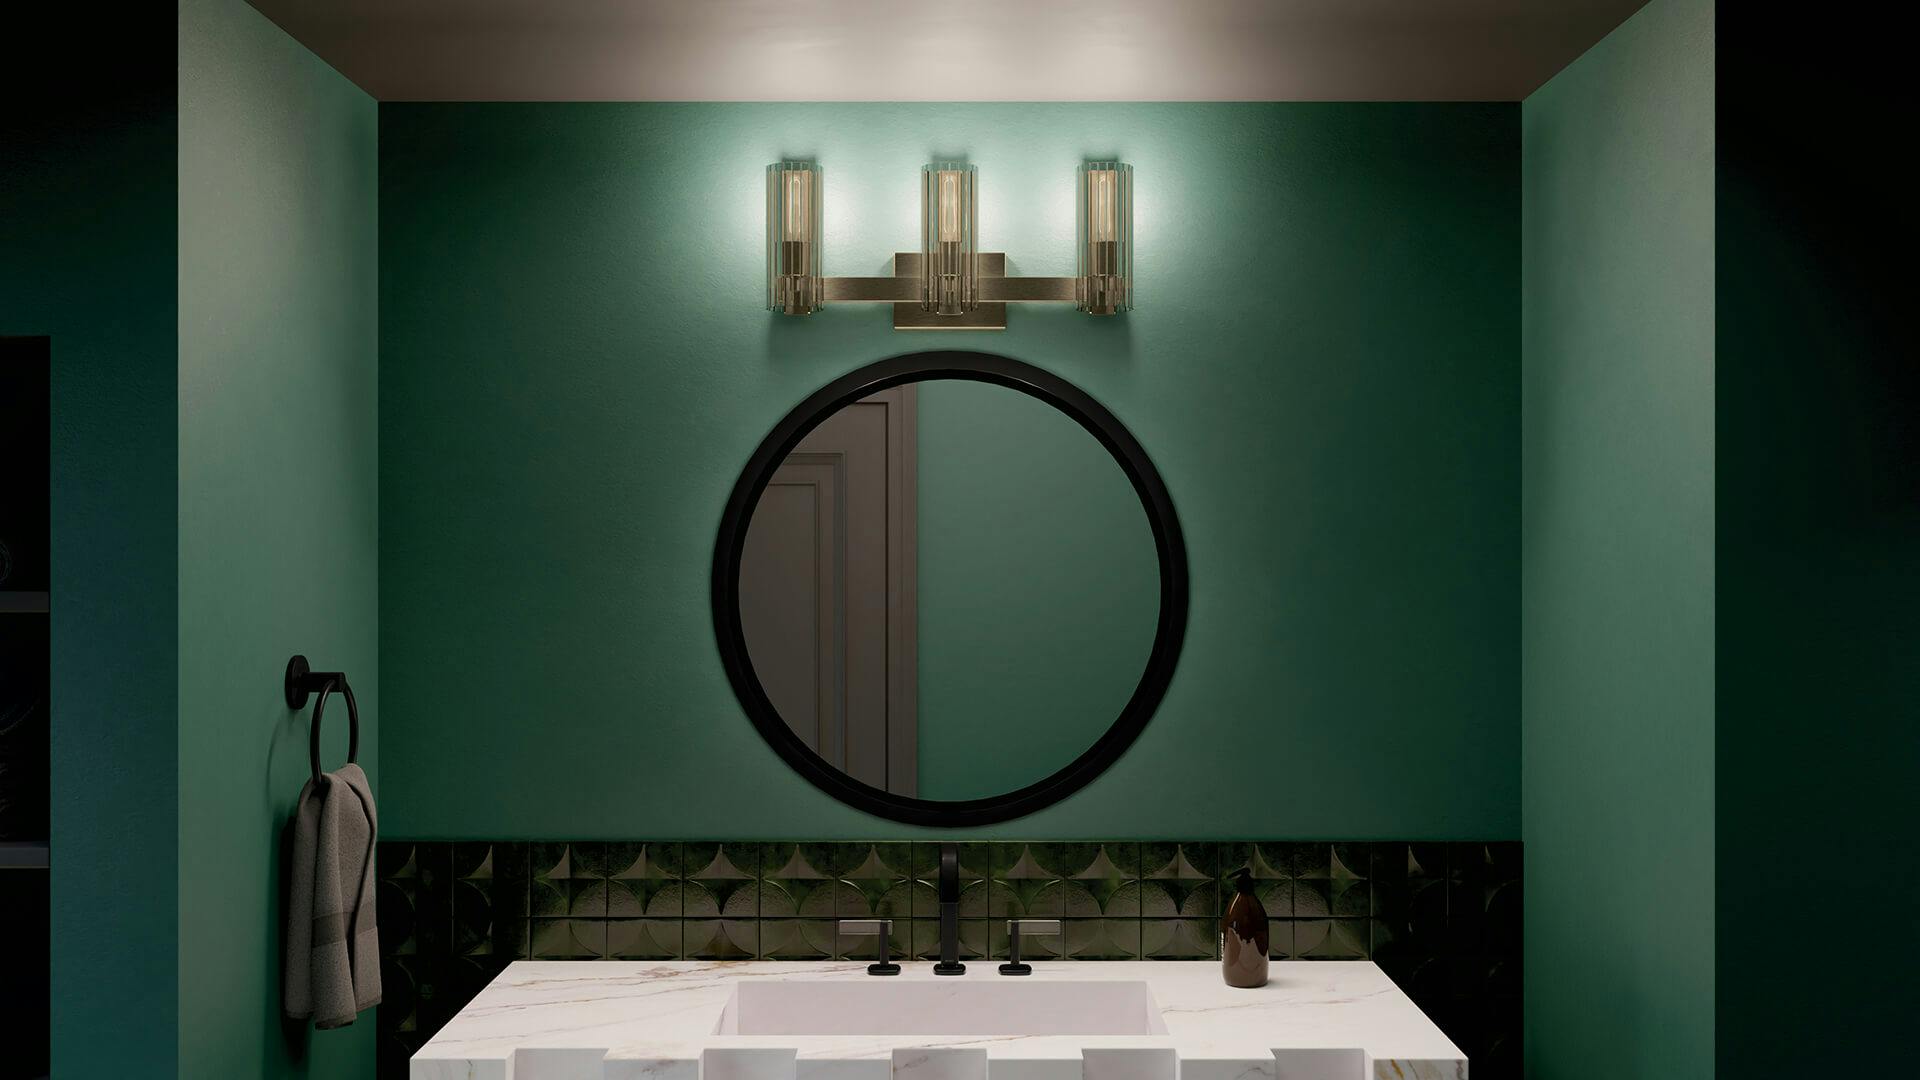 Dark and moody style bathroom with round mirror and featuring Jemsa sconce lights above the vanity